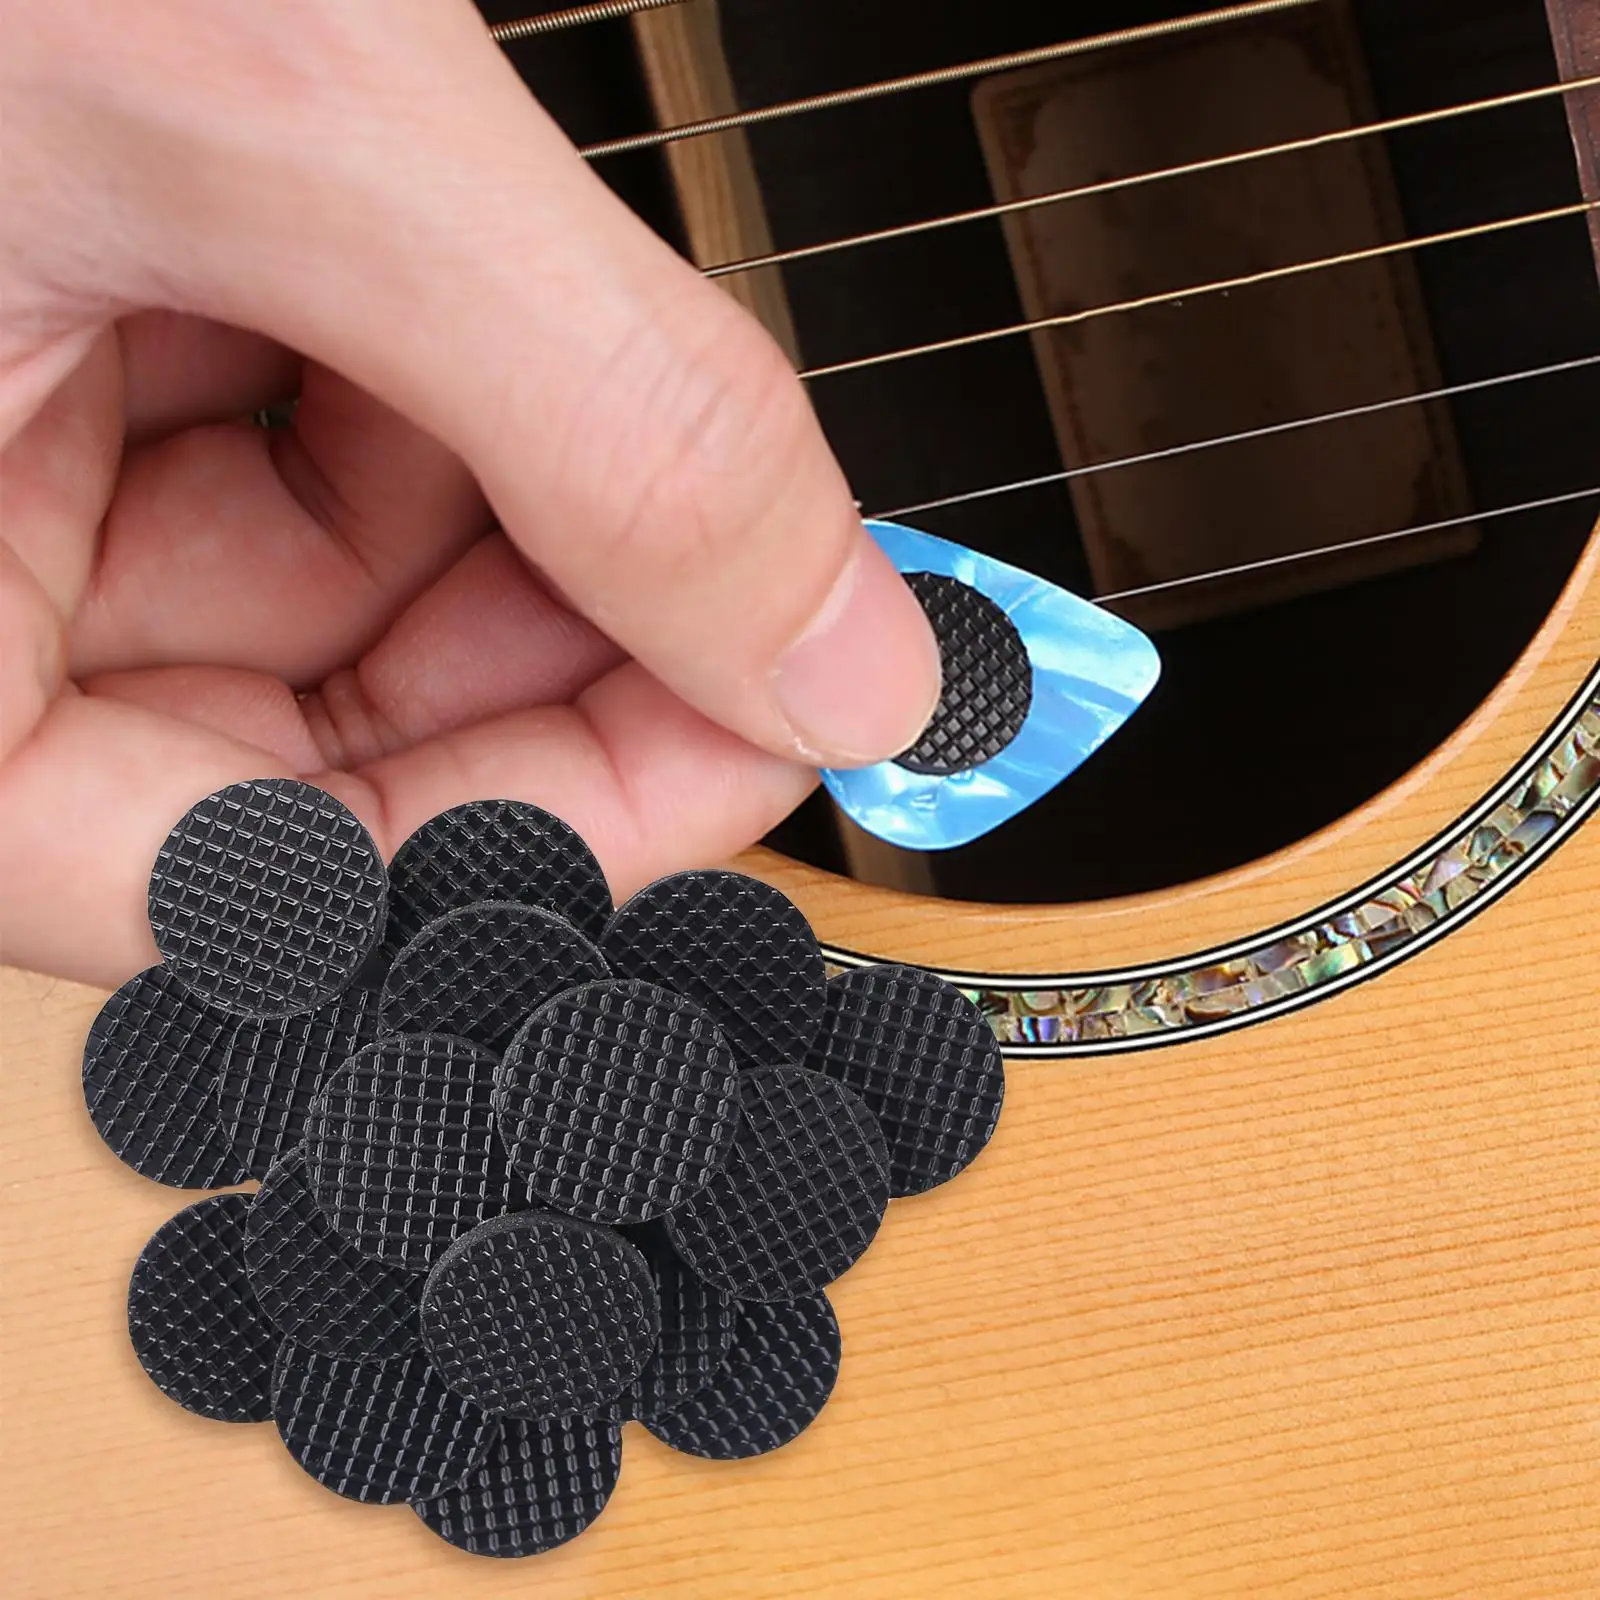 20x Rubber Grips for Guitar Picks Guitar Picks Accessories Stop Dropping